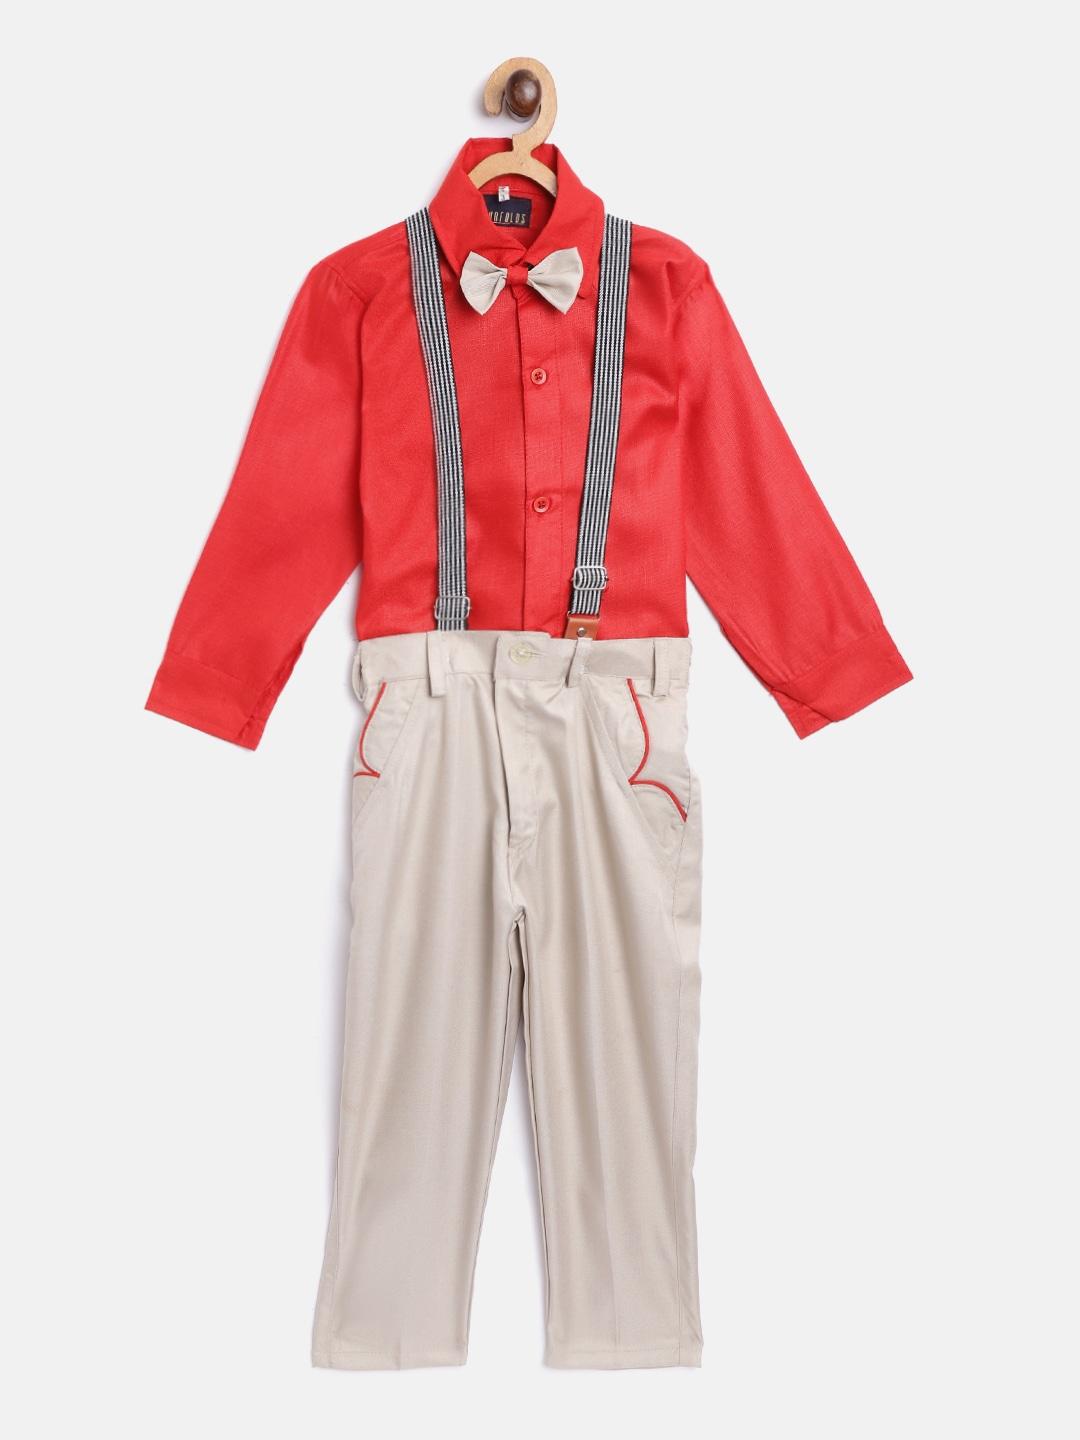 FOURFOLDS Boys Red & Beige Solid Clothing Set with Suspenders & Bow Tie